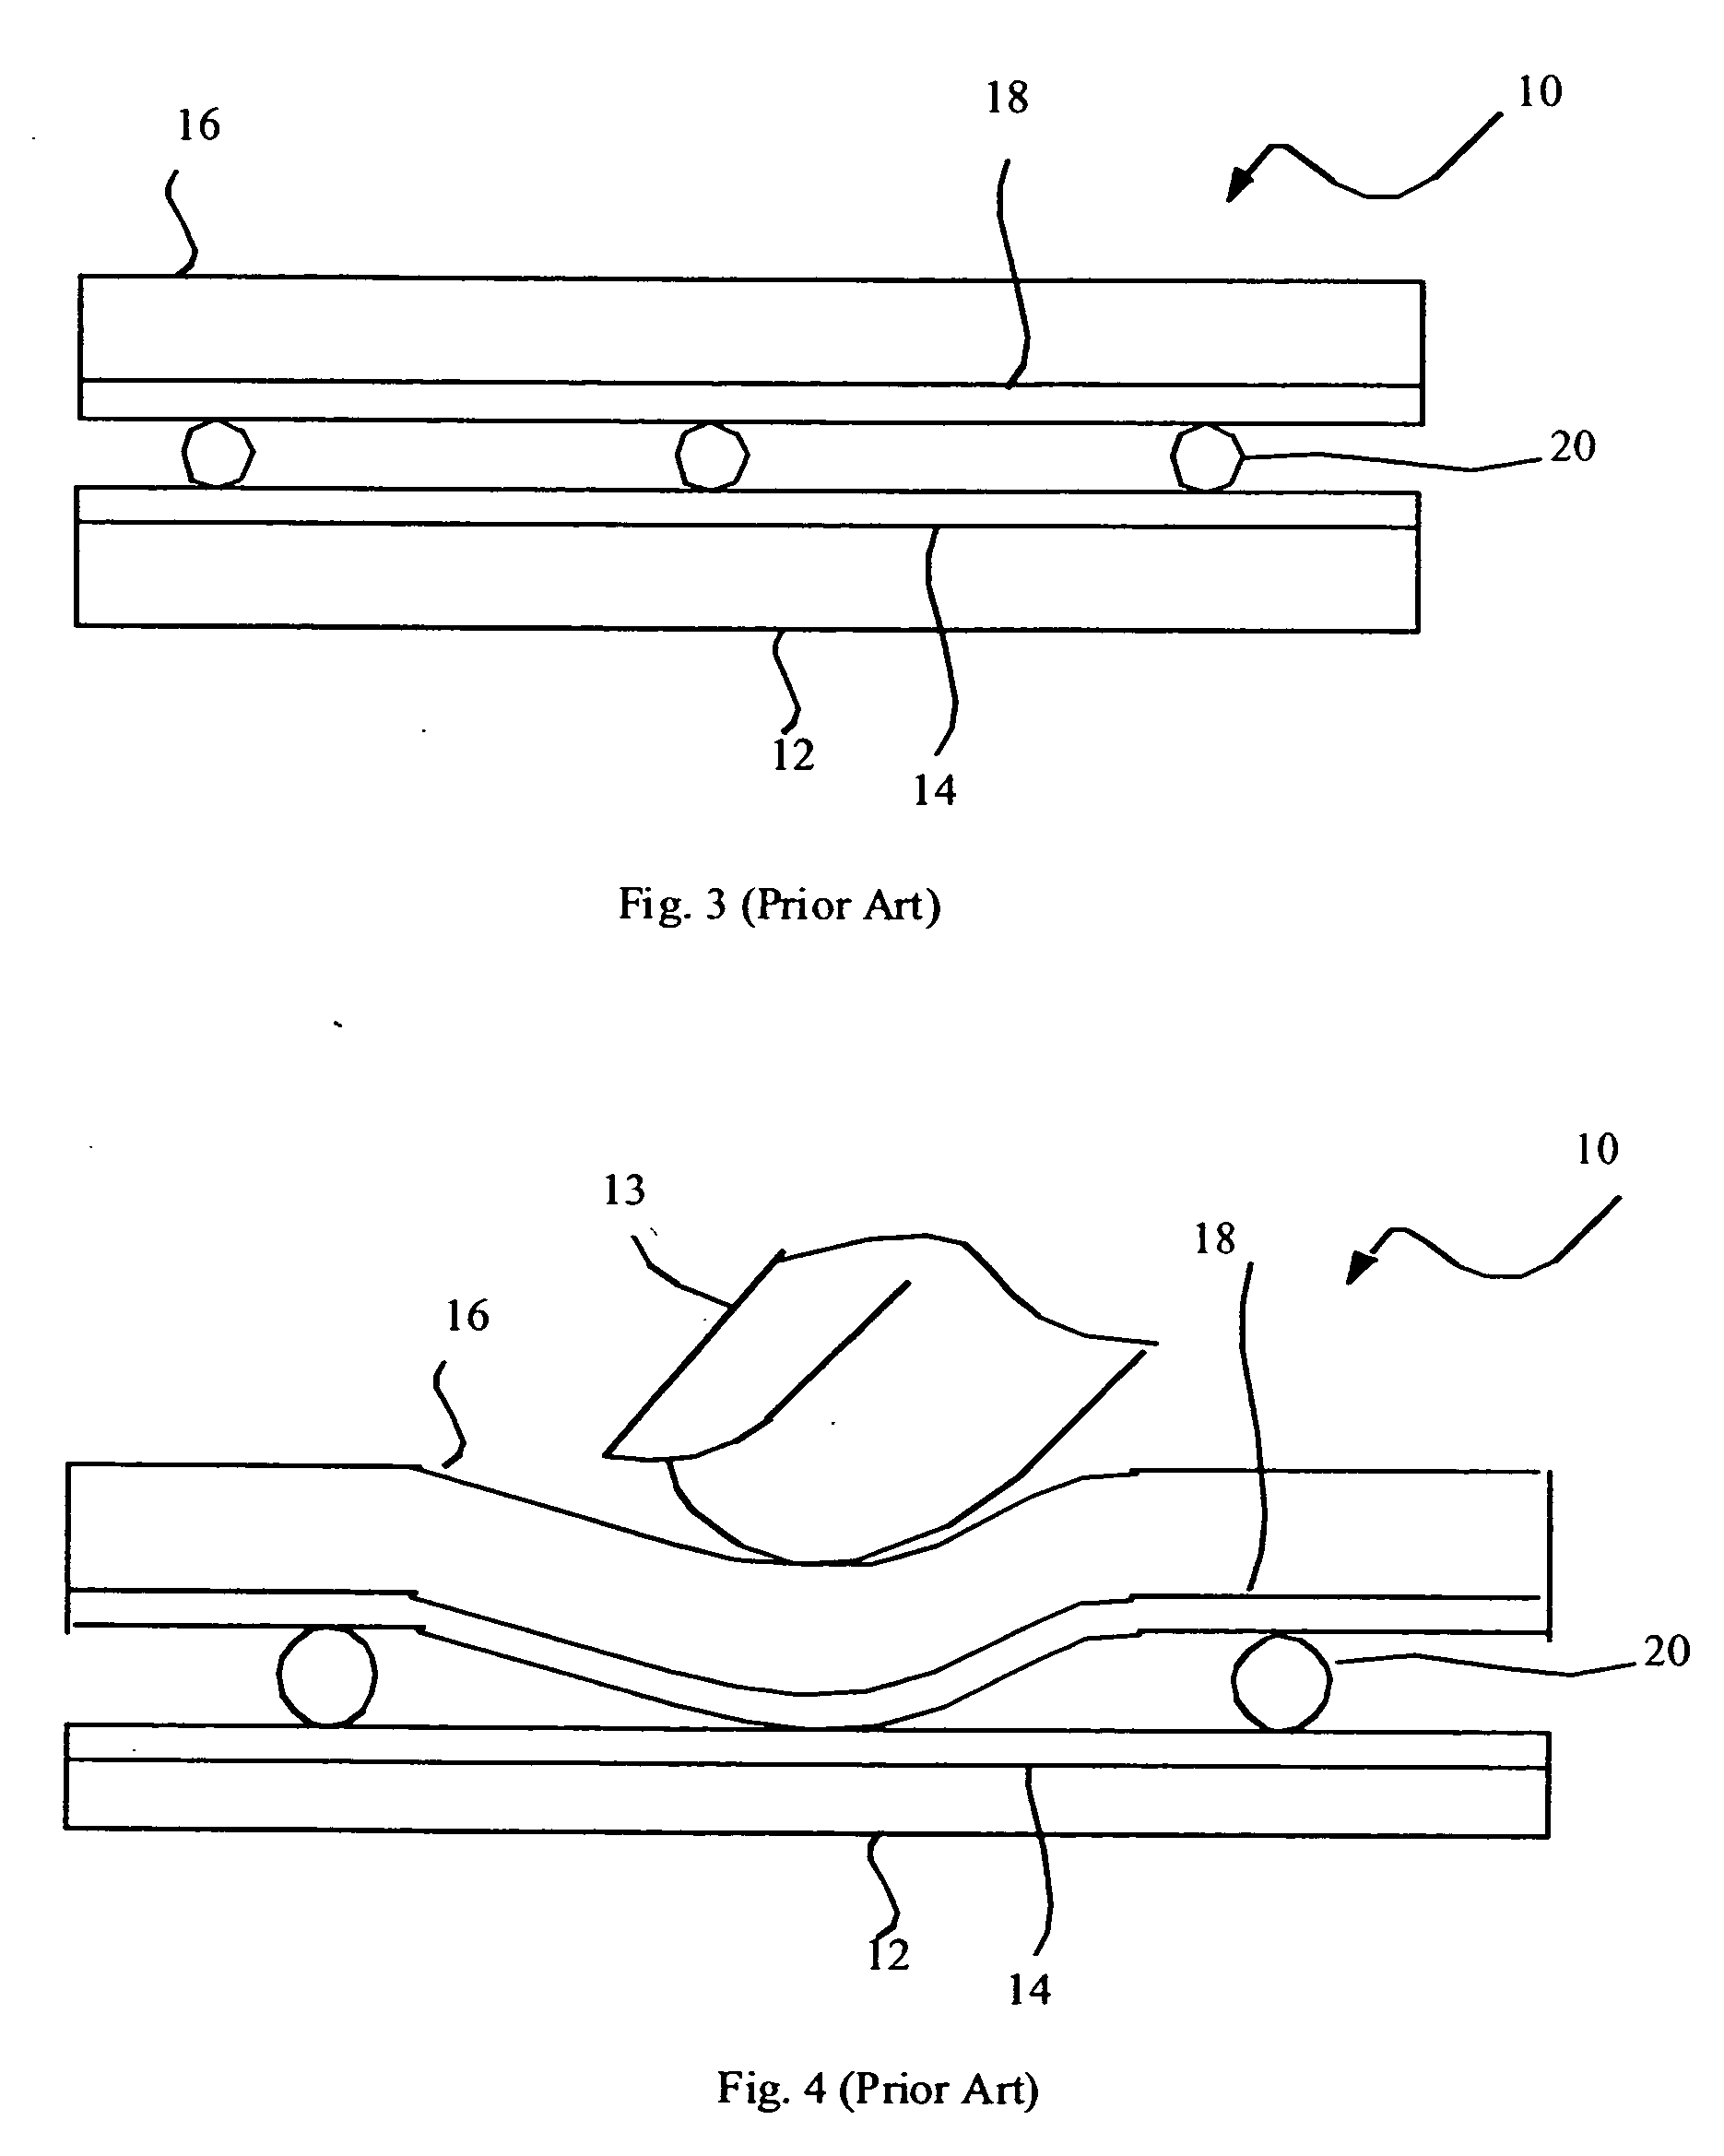 Resistive touch screen having conductive mesh